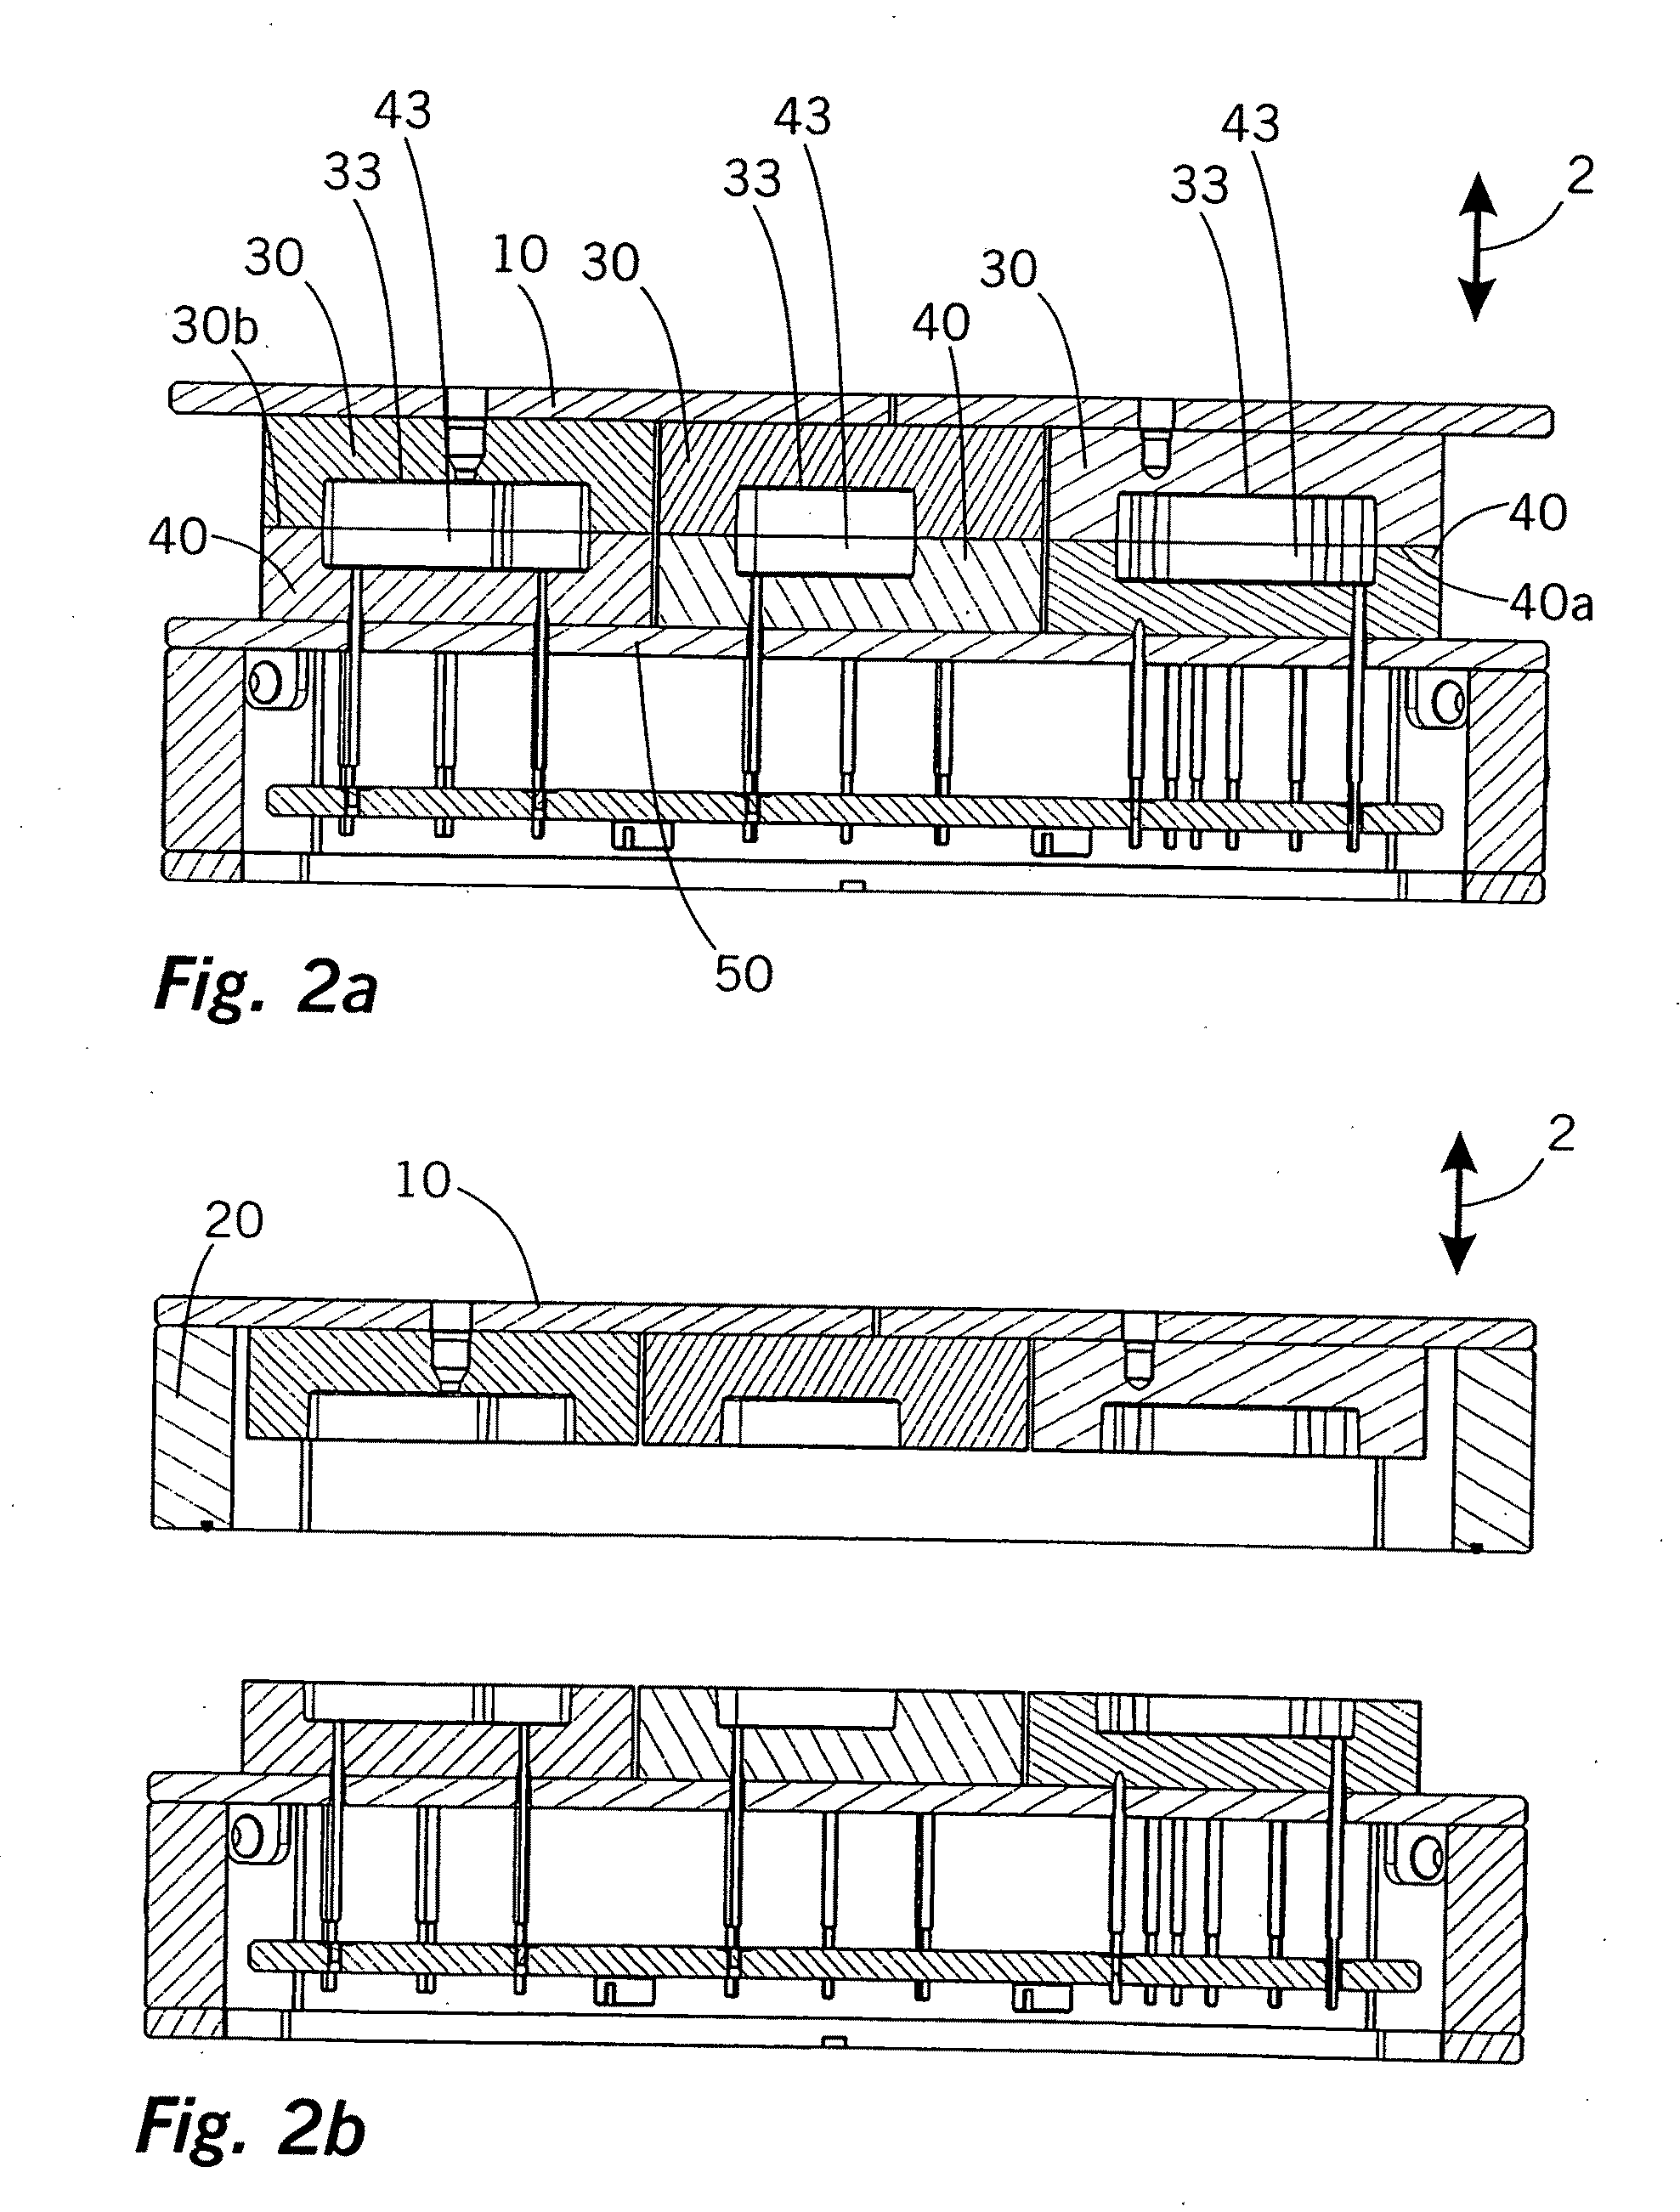 Casting tool and core-making machine